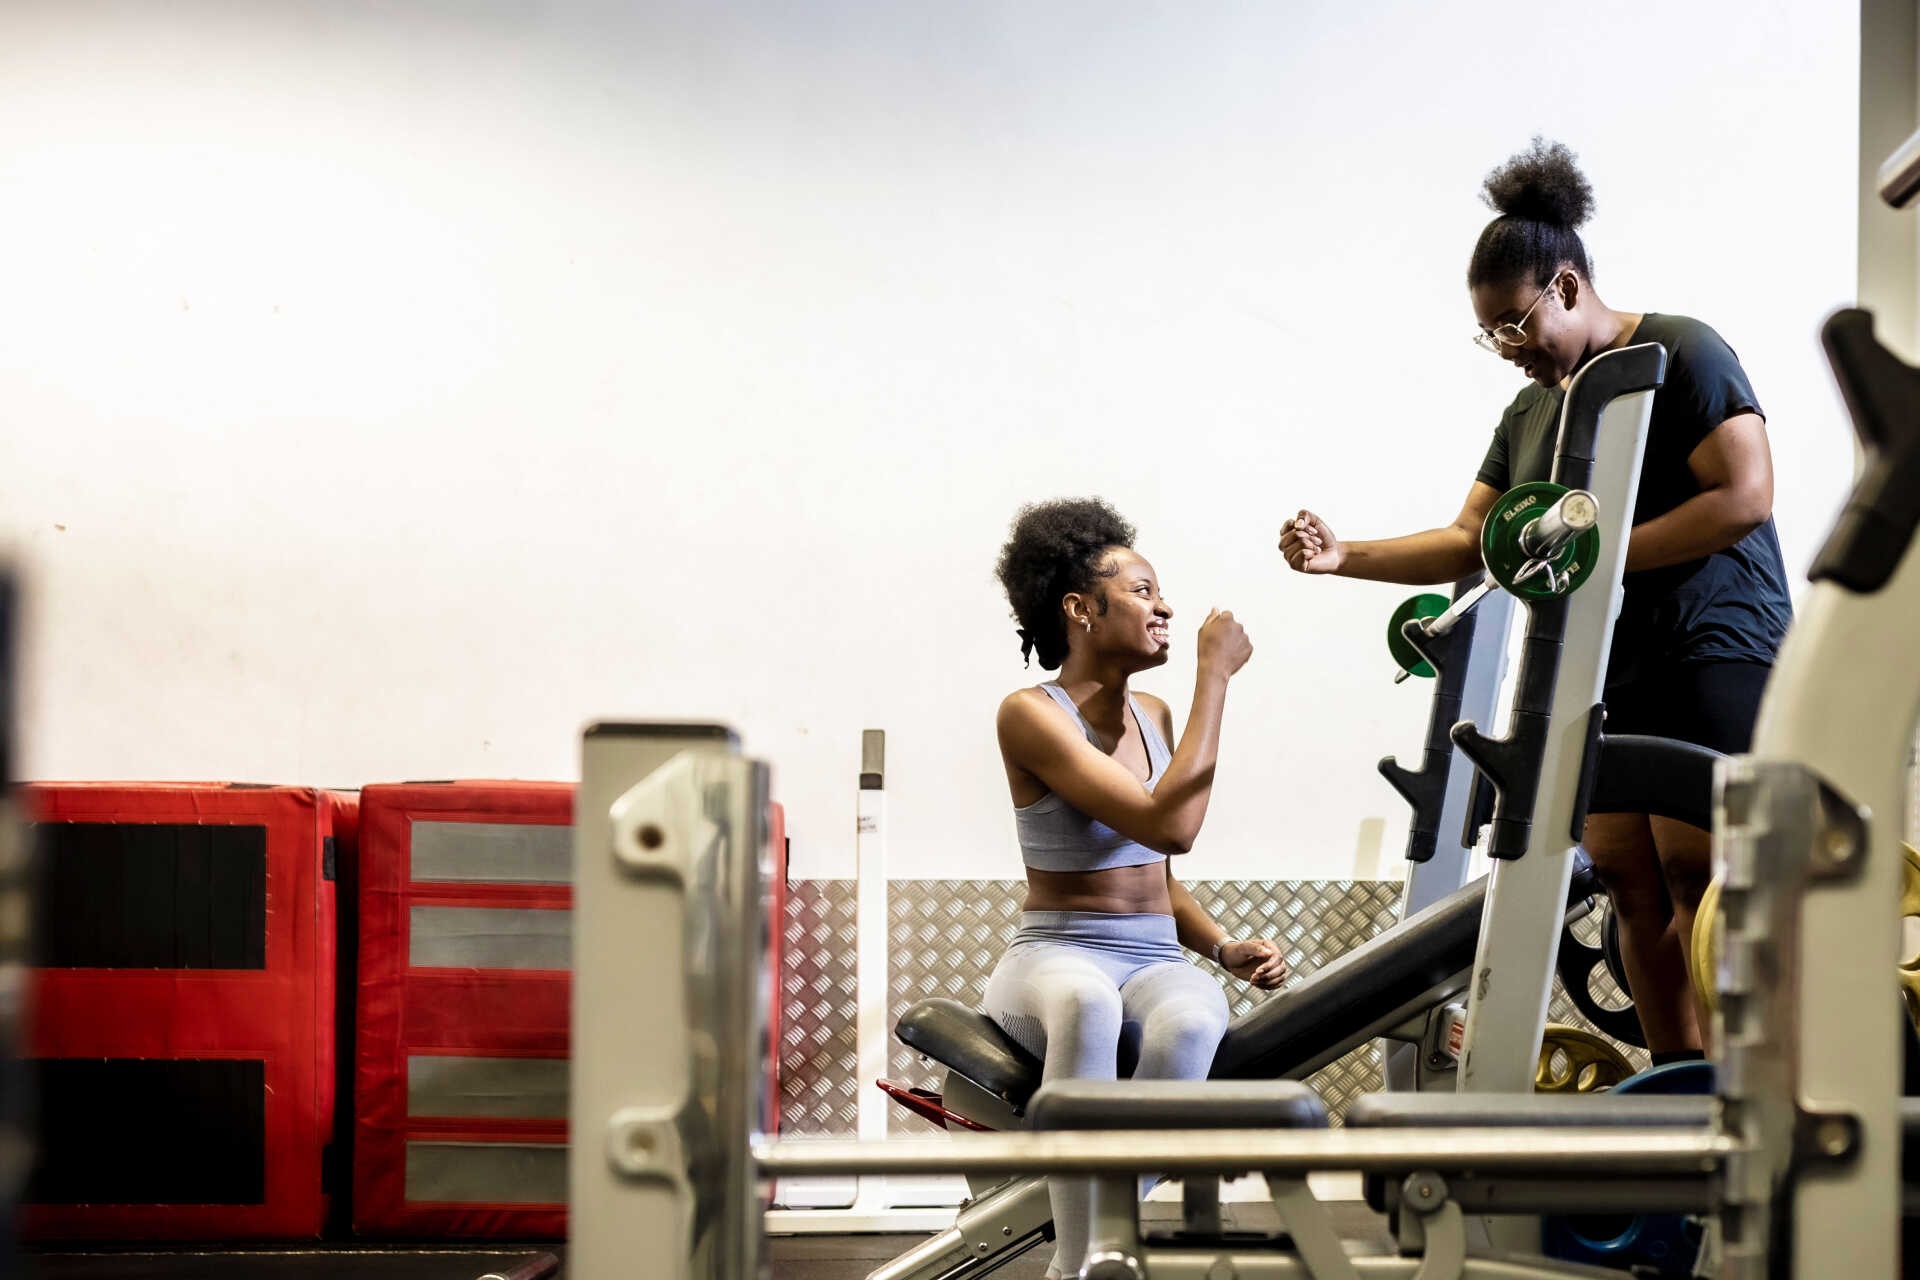 Two students fist bumping at the gym.